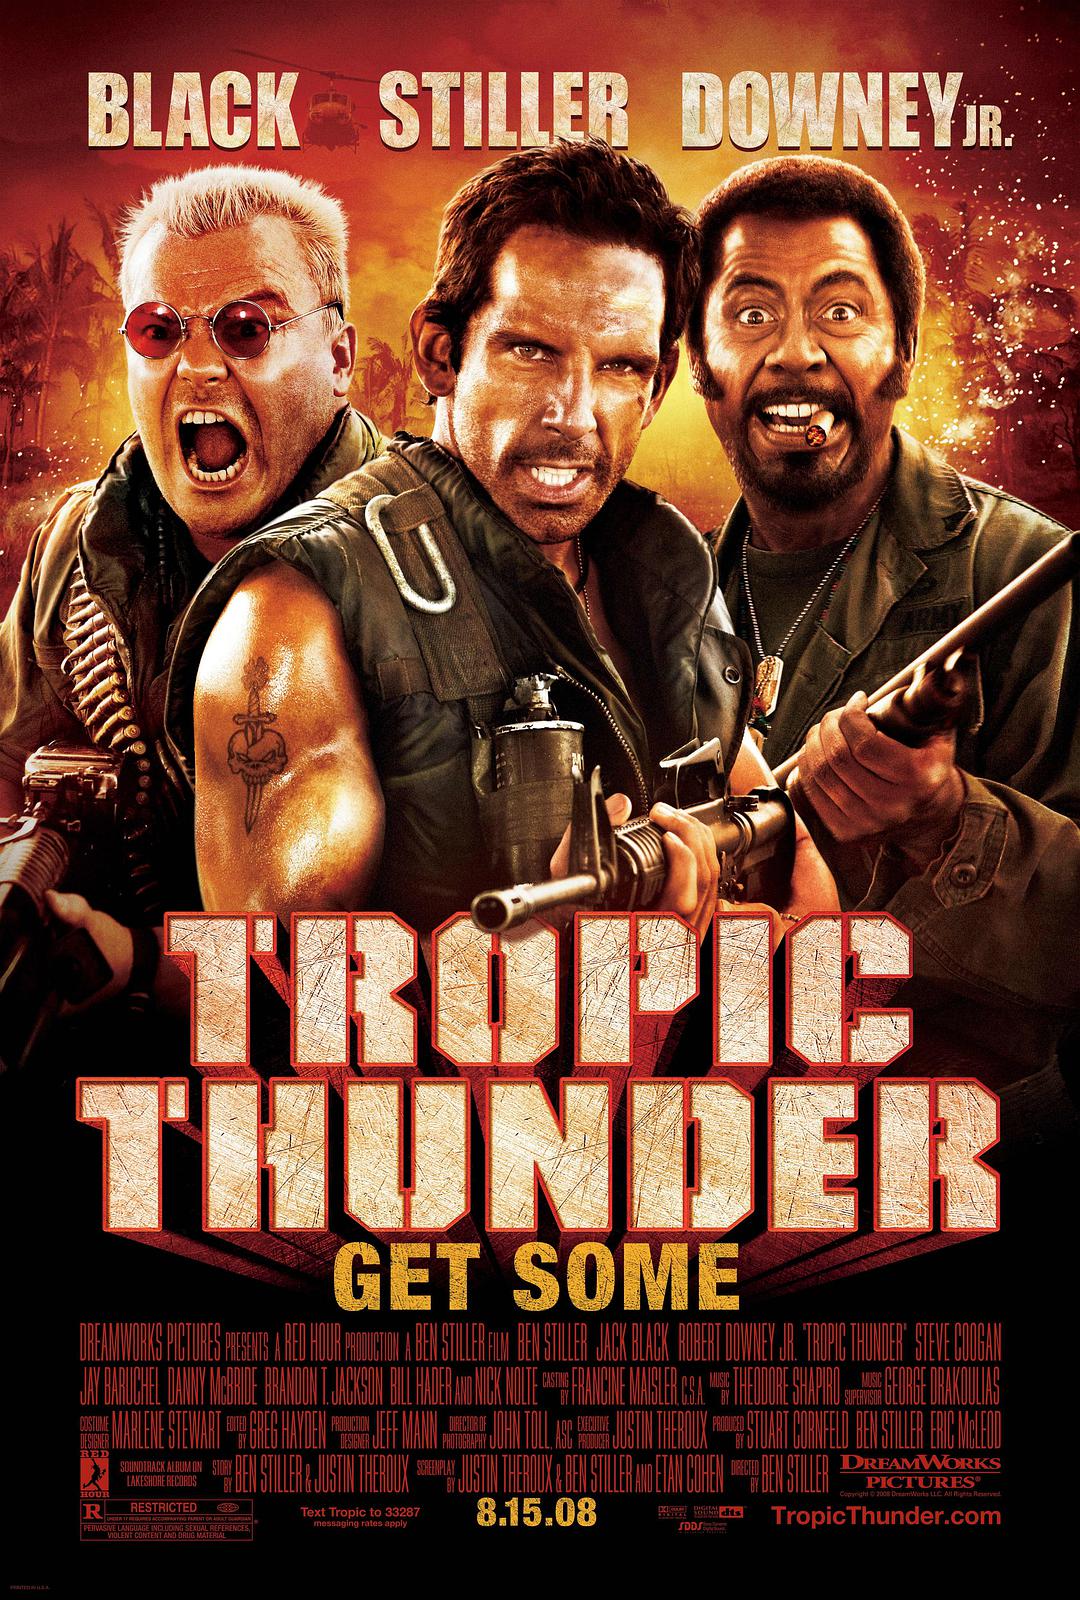 ȴ/ Tropic.Thunder.2008.UNRATED.DC.1080p.BluRay.x264.DTS-FGT 8.68GB-1.png